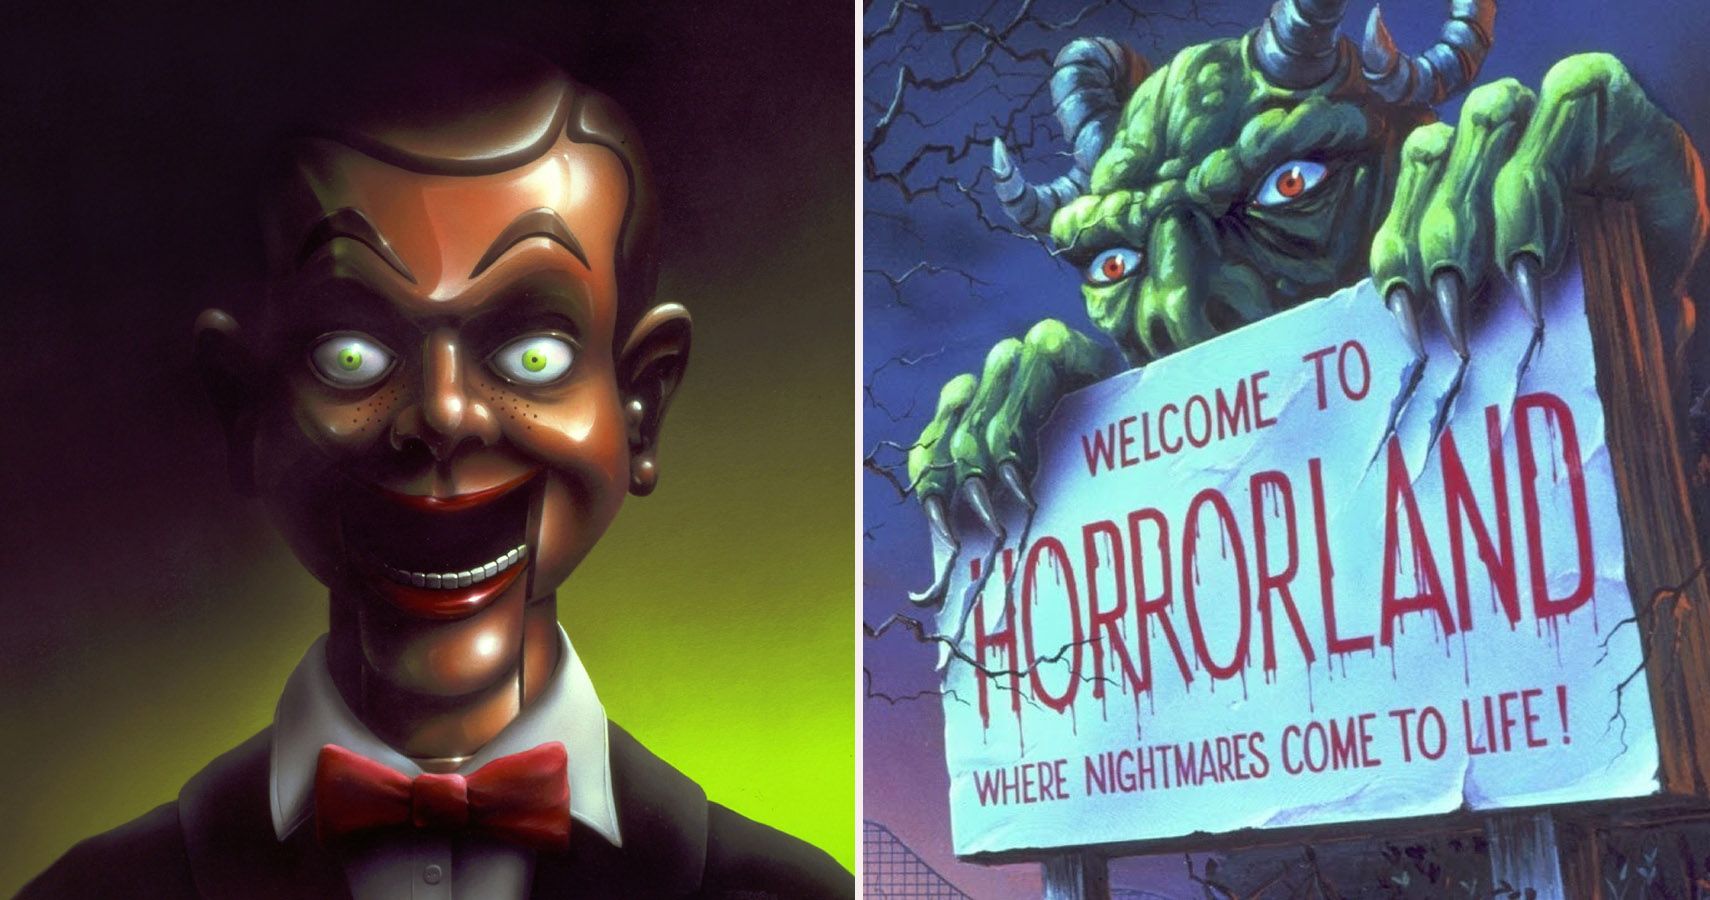 10 Scariest Goosebumps Episodes To Watch This Halloween